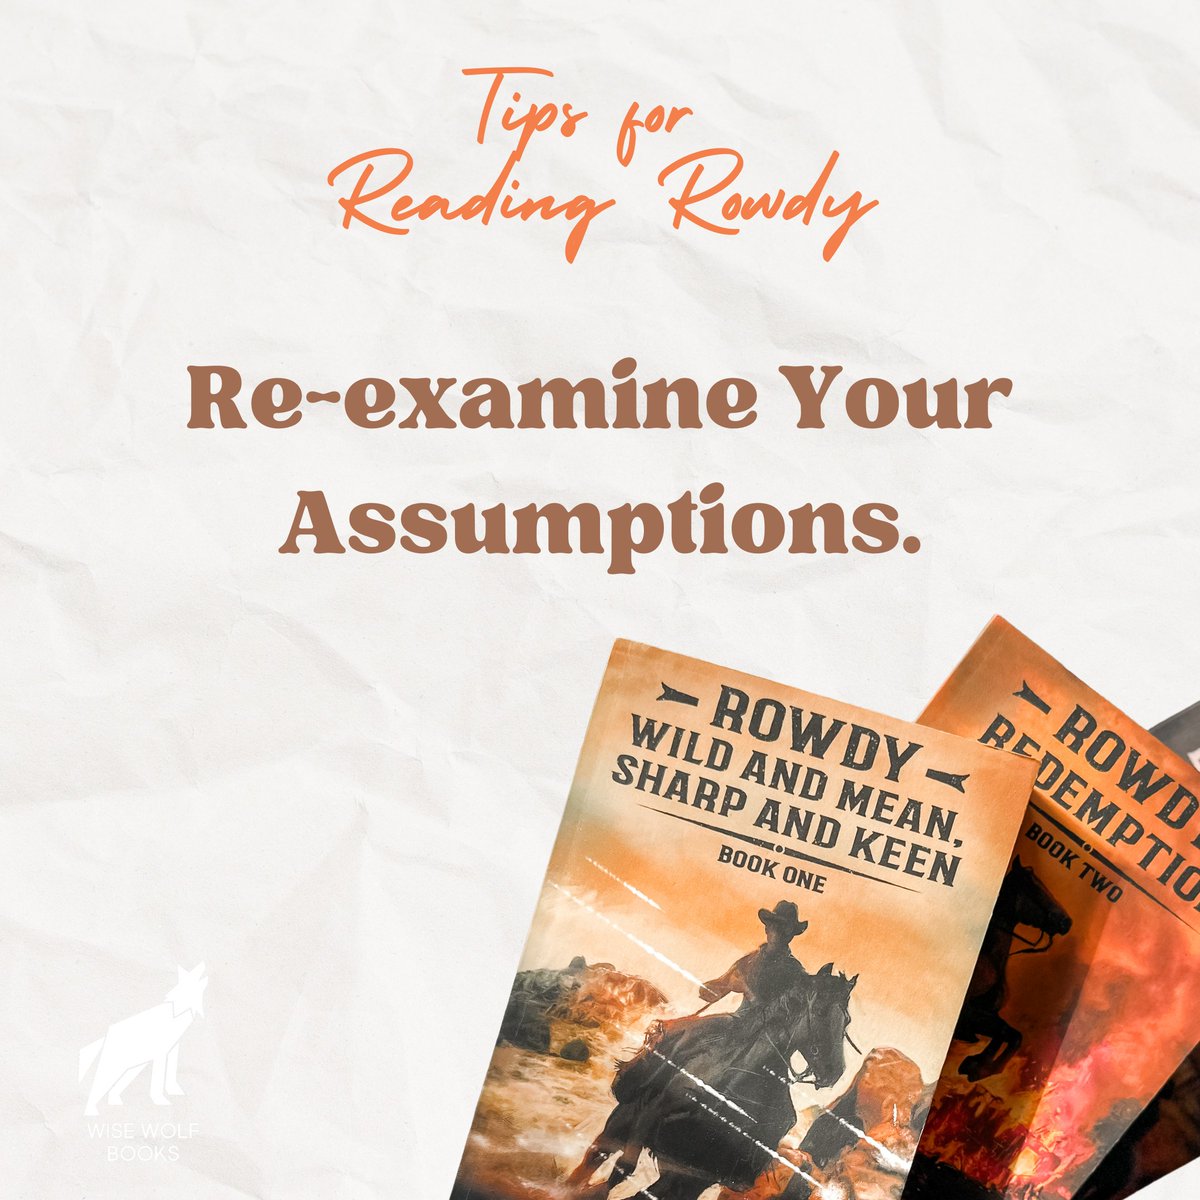 📚🔥 Get Ready for an Explosive Adventure! 🔥📚

From award-winning author Chris Mullen comes Rowdy, an electrifying coming-of-age Western series! A thrilling saga filled with danger, redemption, and unbreakable bonds. Swipe to see some of our expert tips for reading Rowdy!